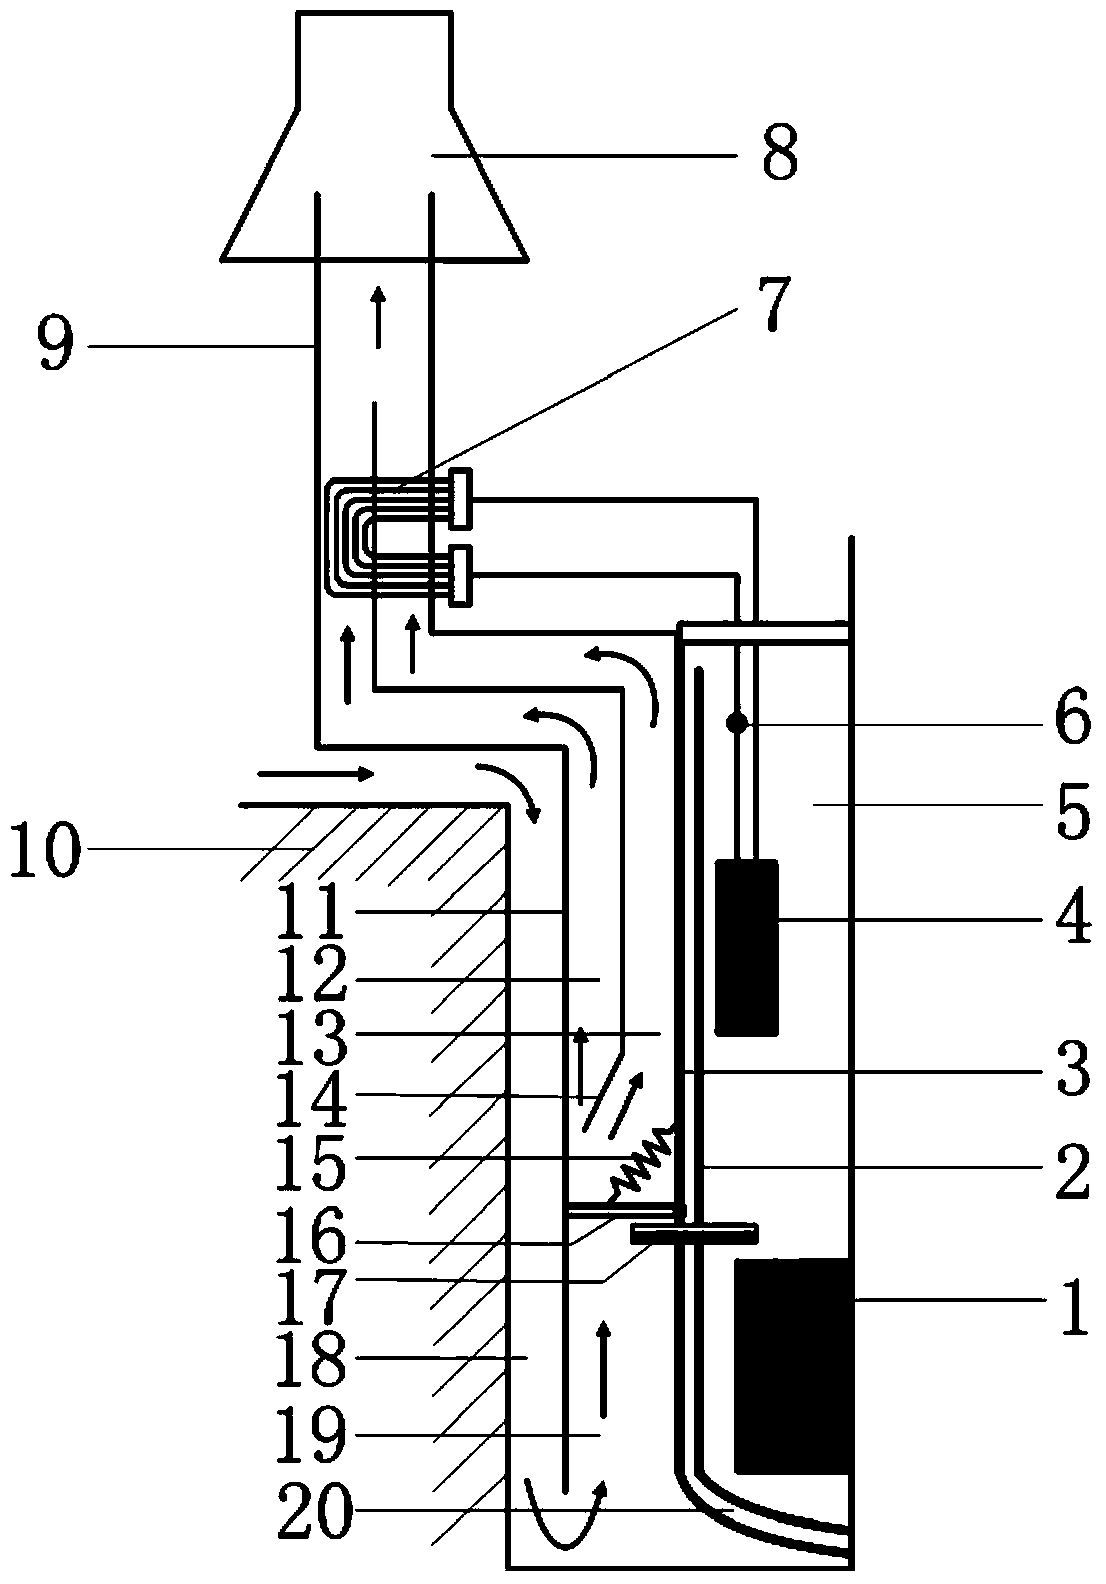 Temperature-triggered passive accident residual heat removal system for pool type reactor